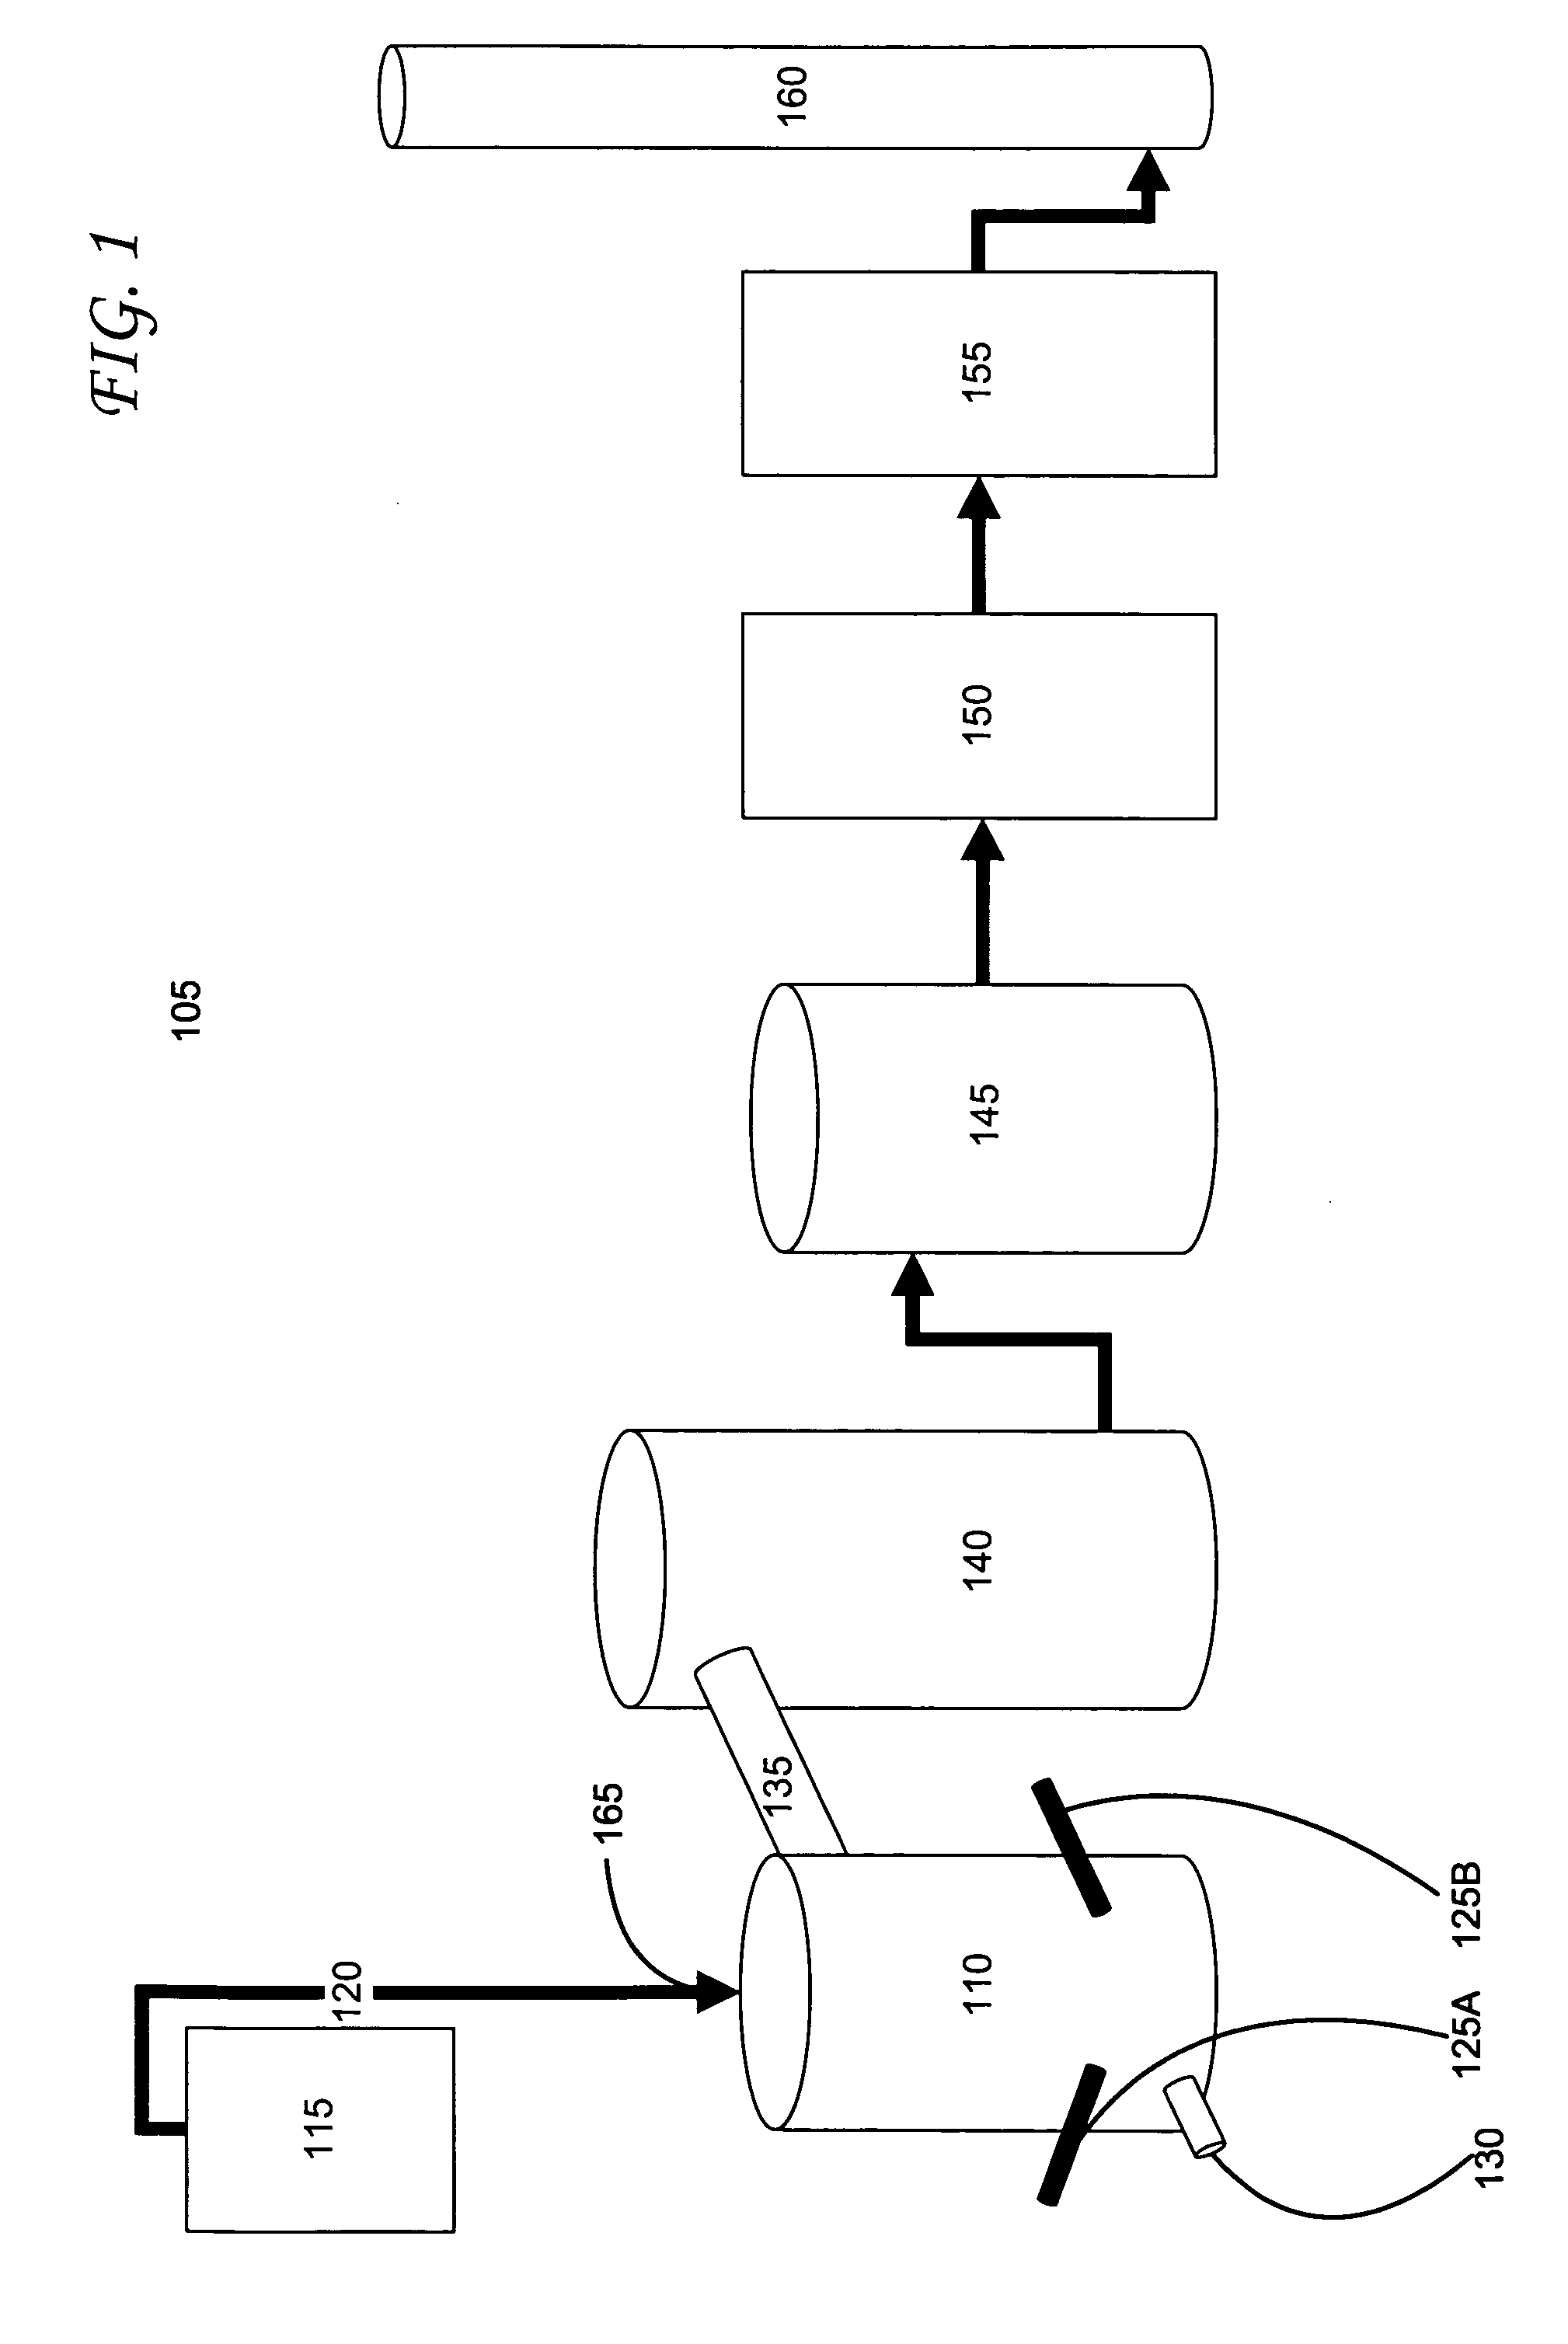 Systems and methods for integrated plasma processing of waste